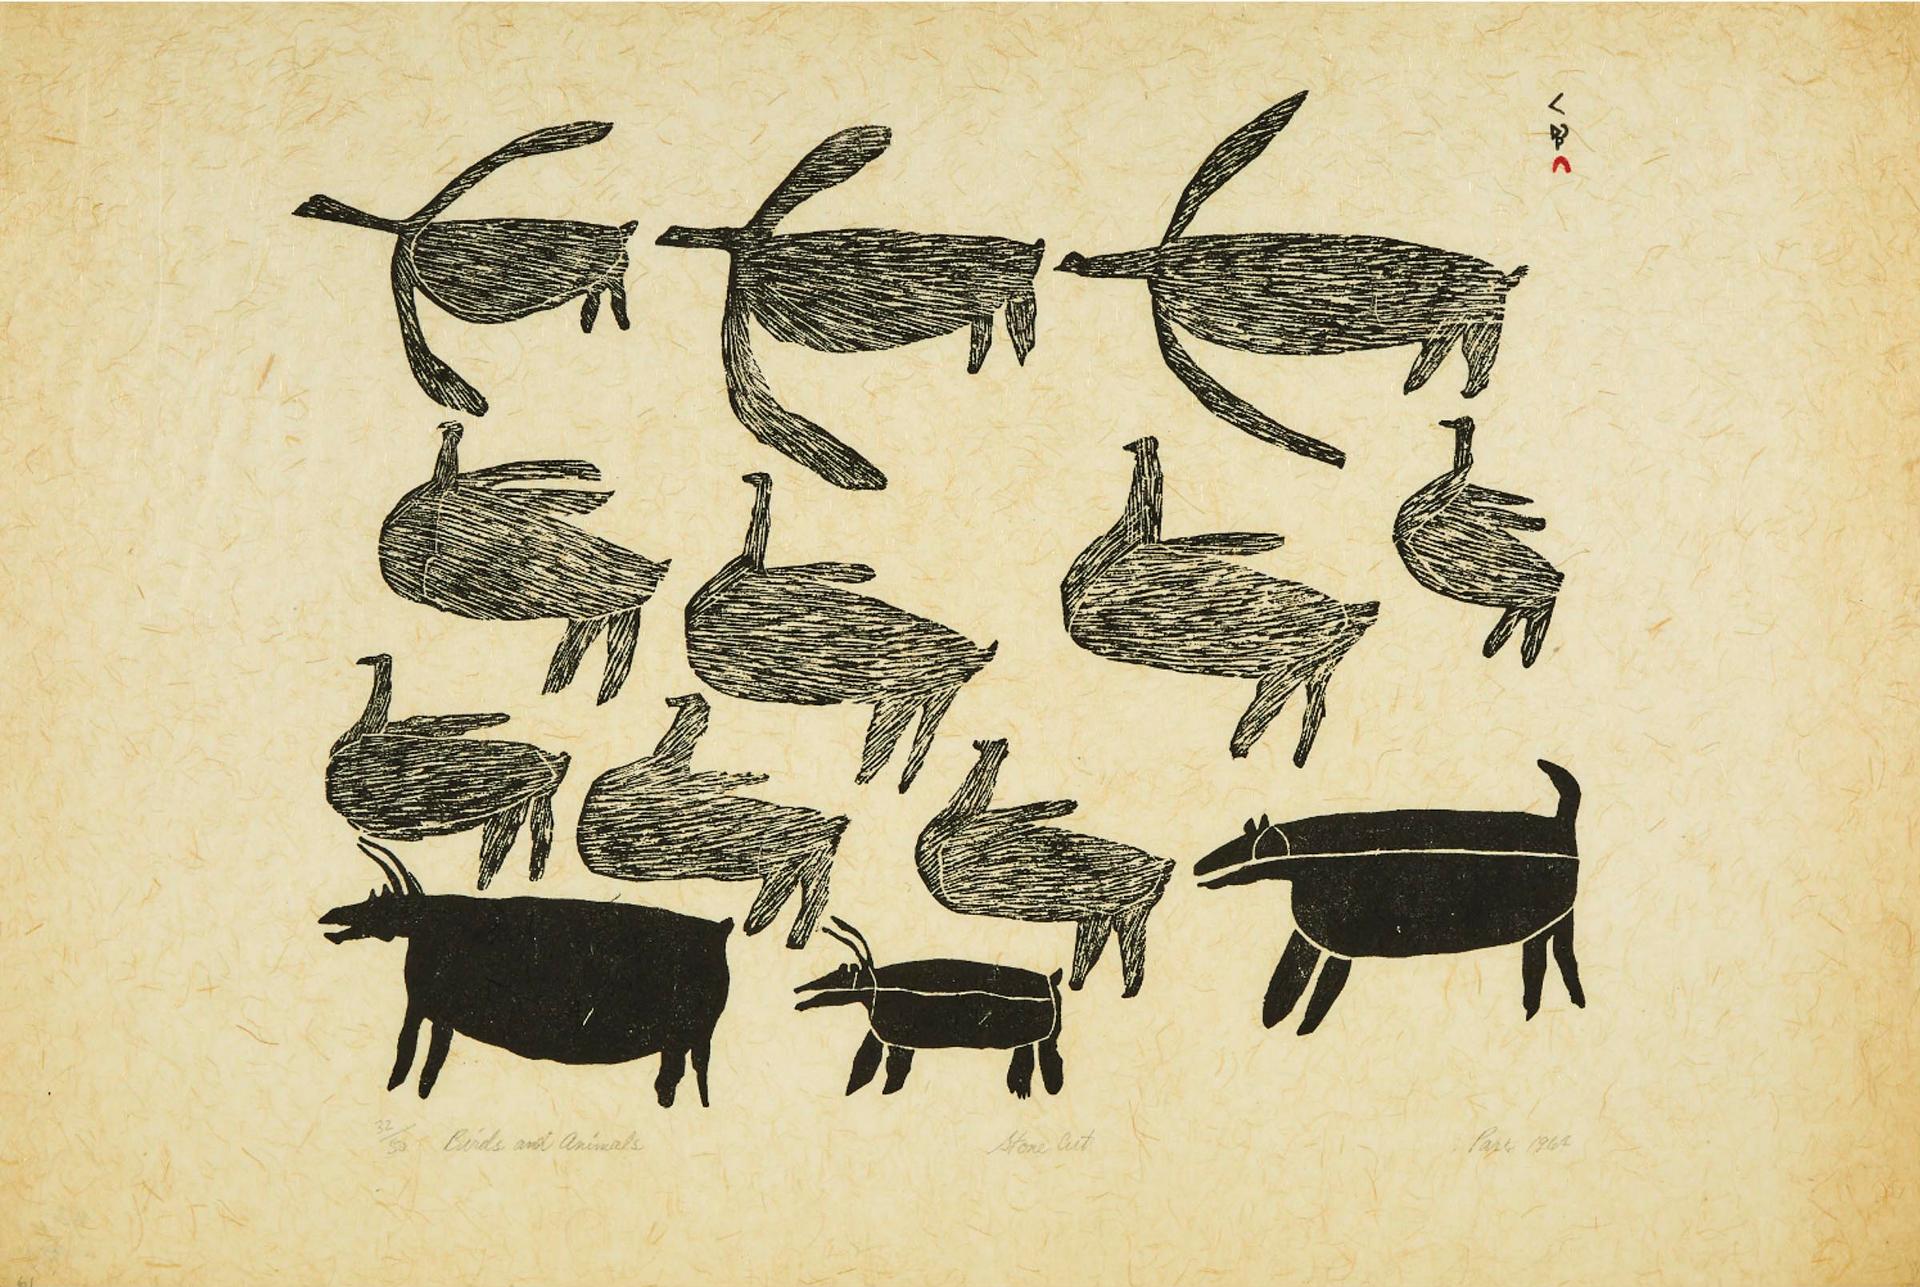 Parr (1893-1969) - Birds And Animals, 1964